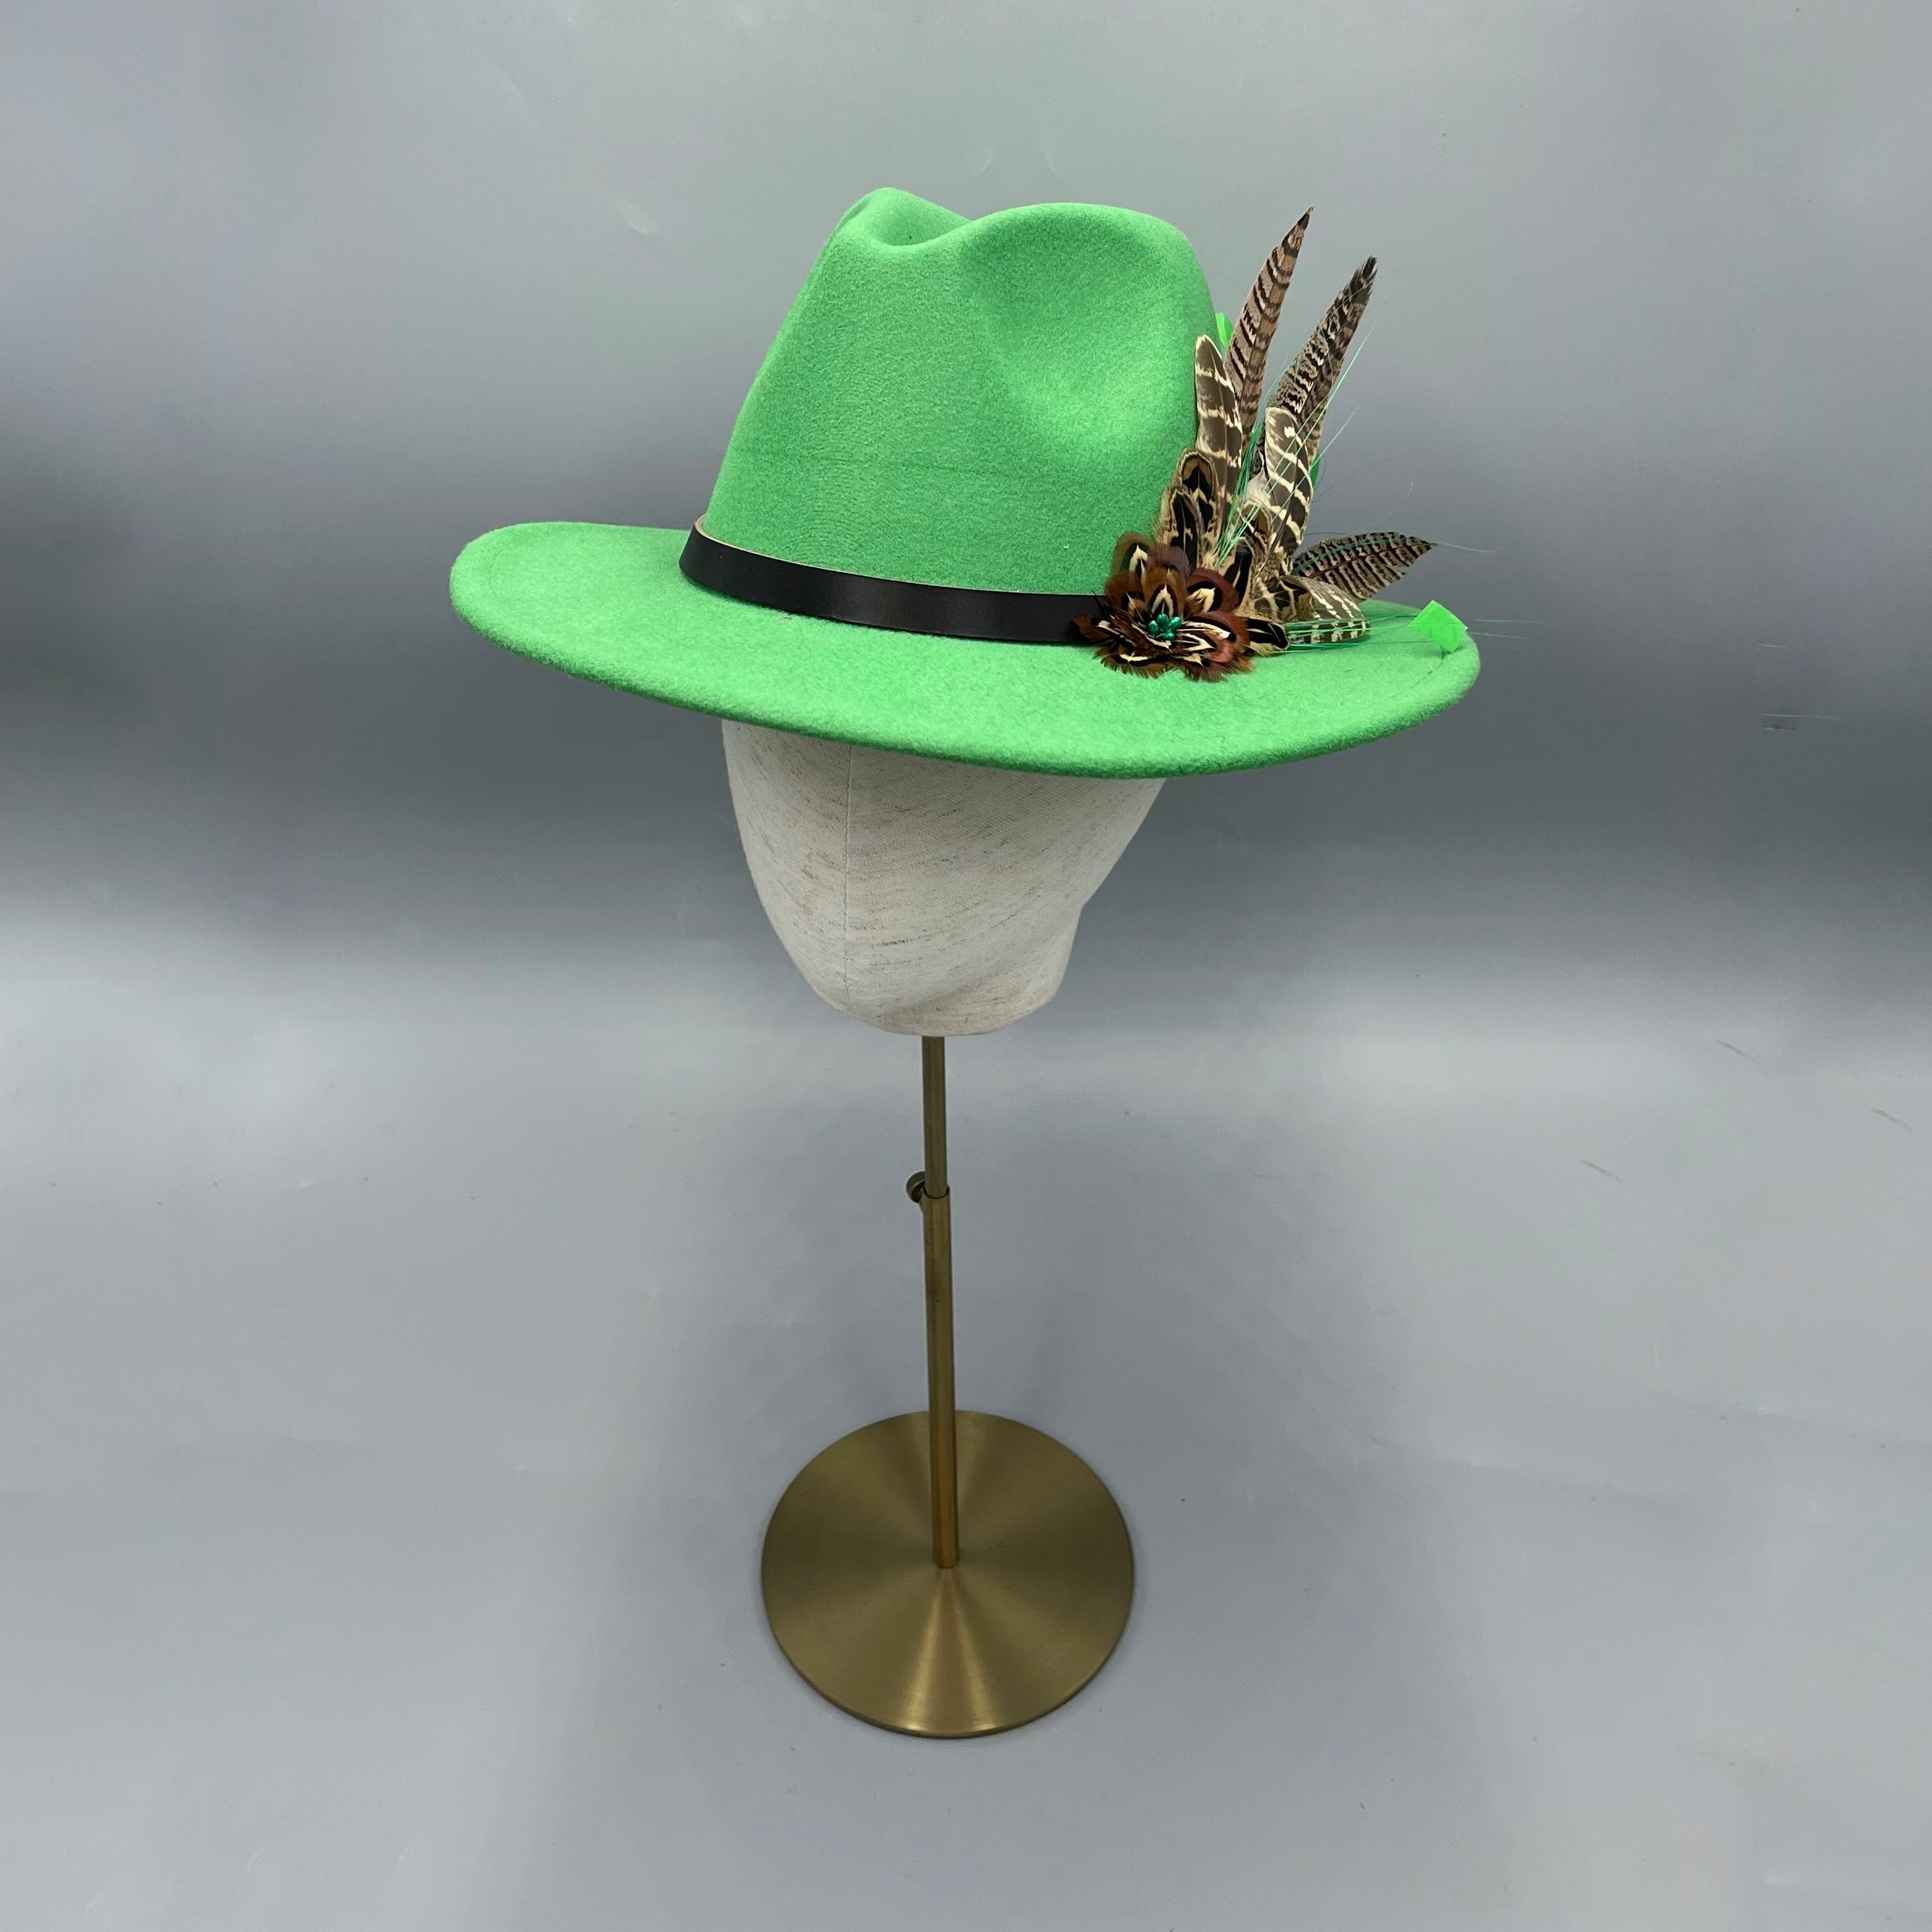 Emerald green fedora hat with pheasant feathers